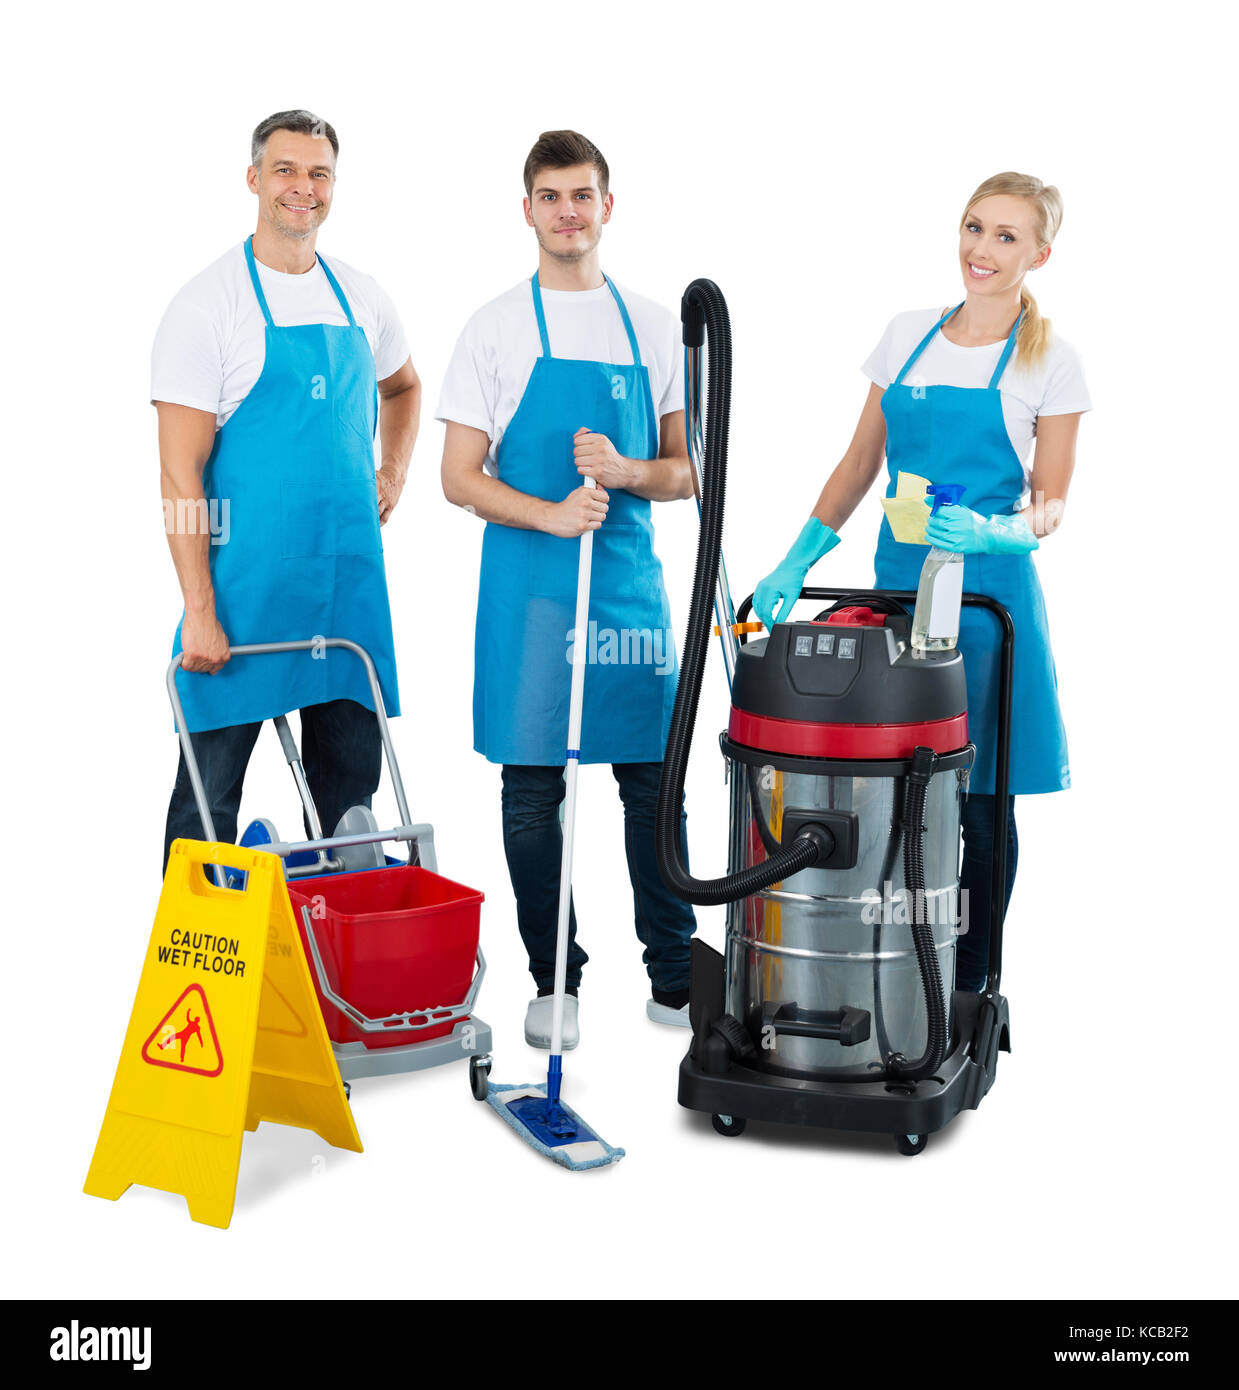 Group Of Janitors With Their Cleaning Equipment Standing On White Background Stock Photo